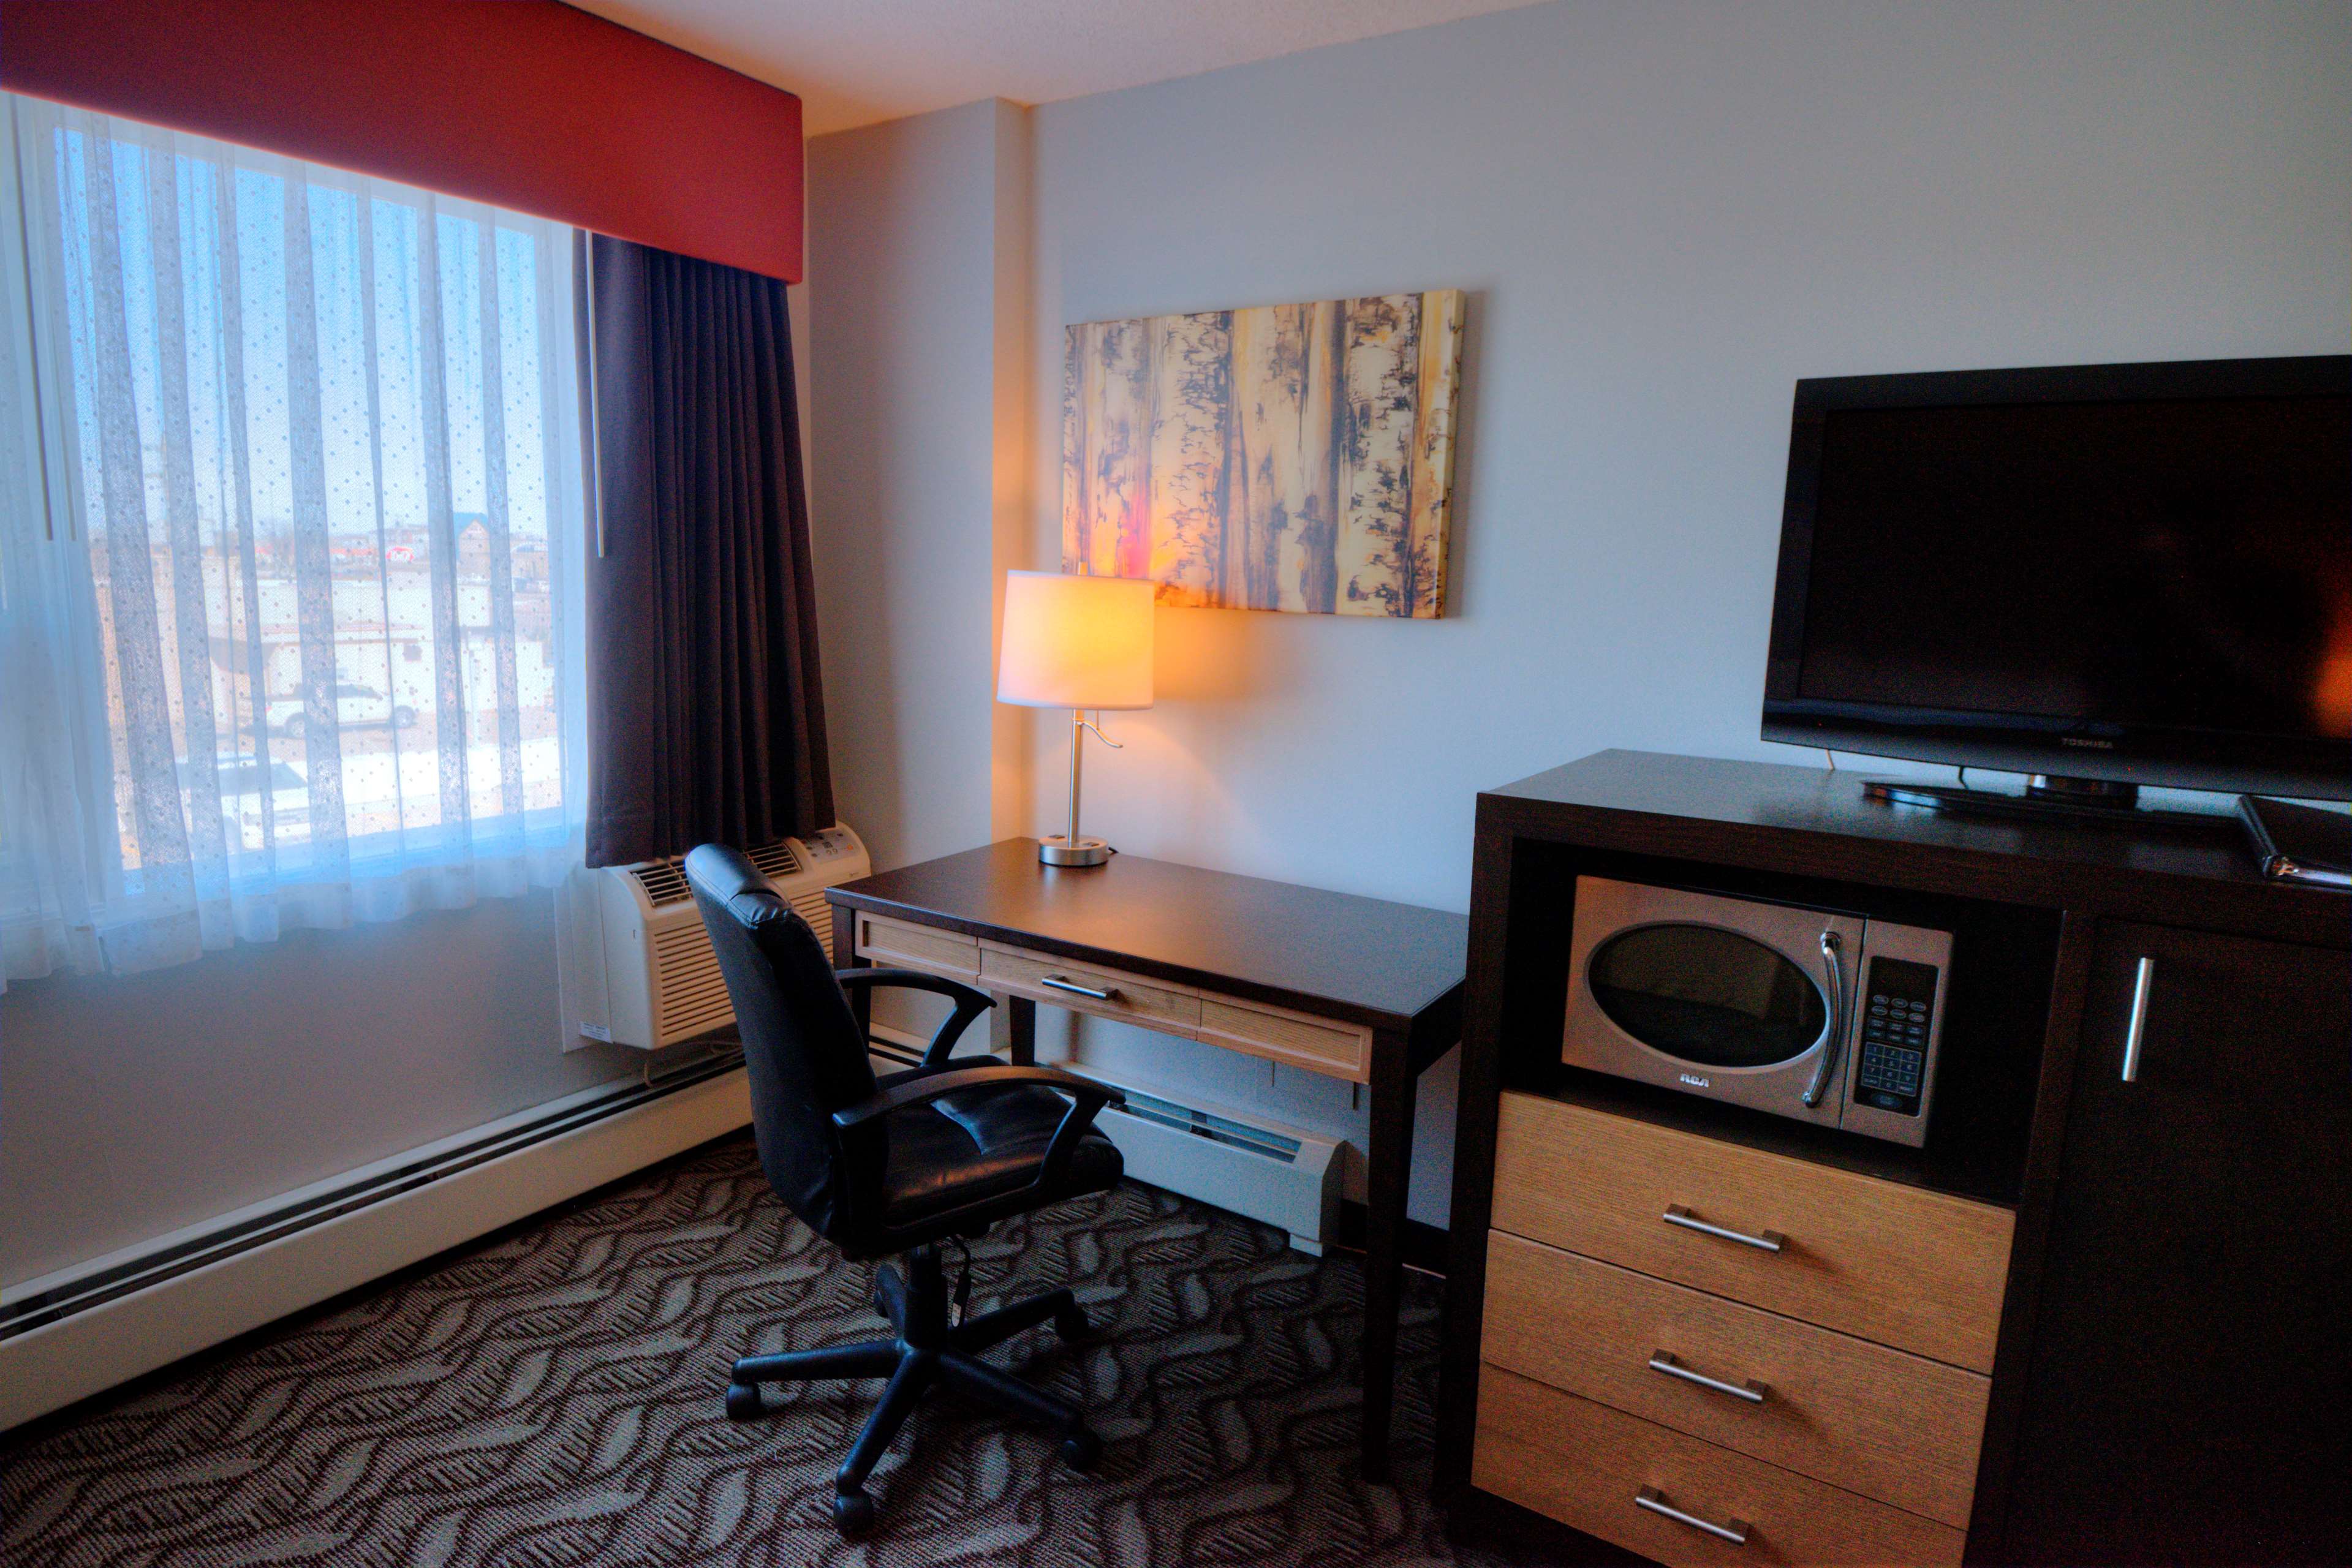 Best Western Airdrie in Airdrie: All rooms have mini fridge and microwave.